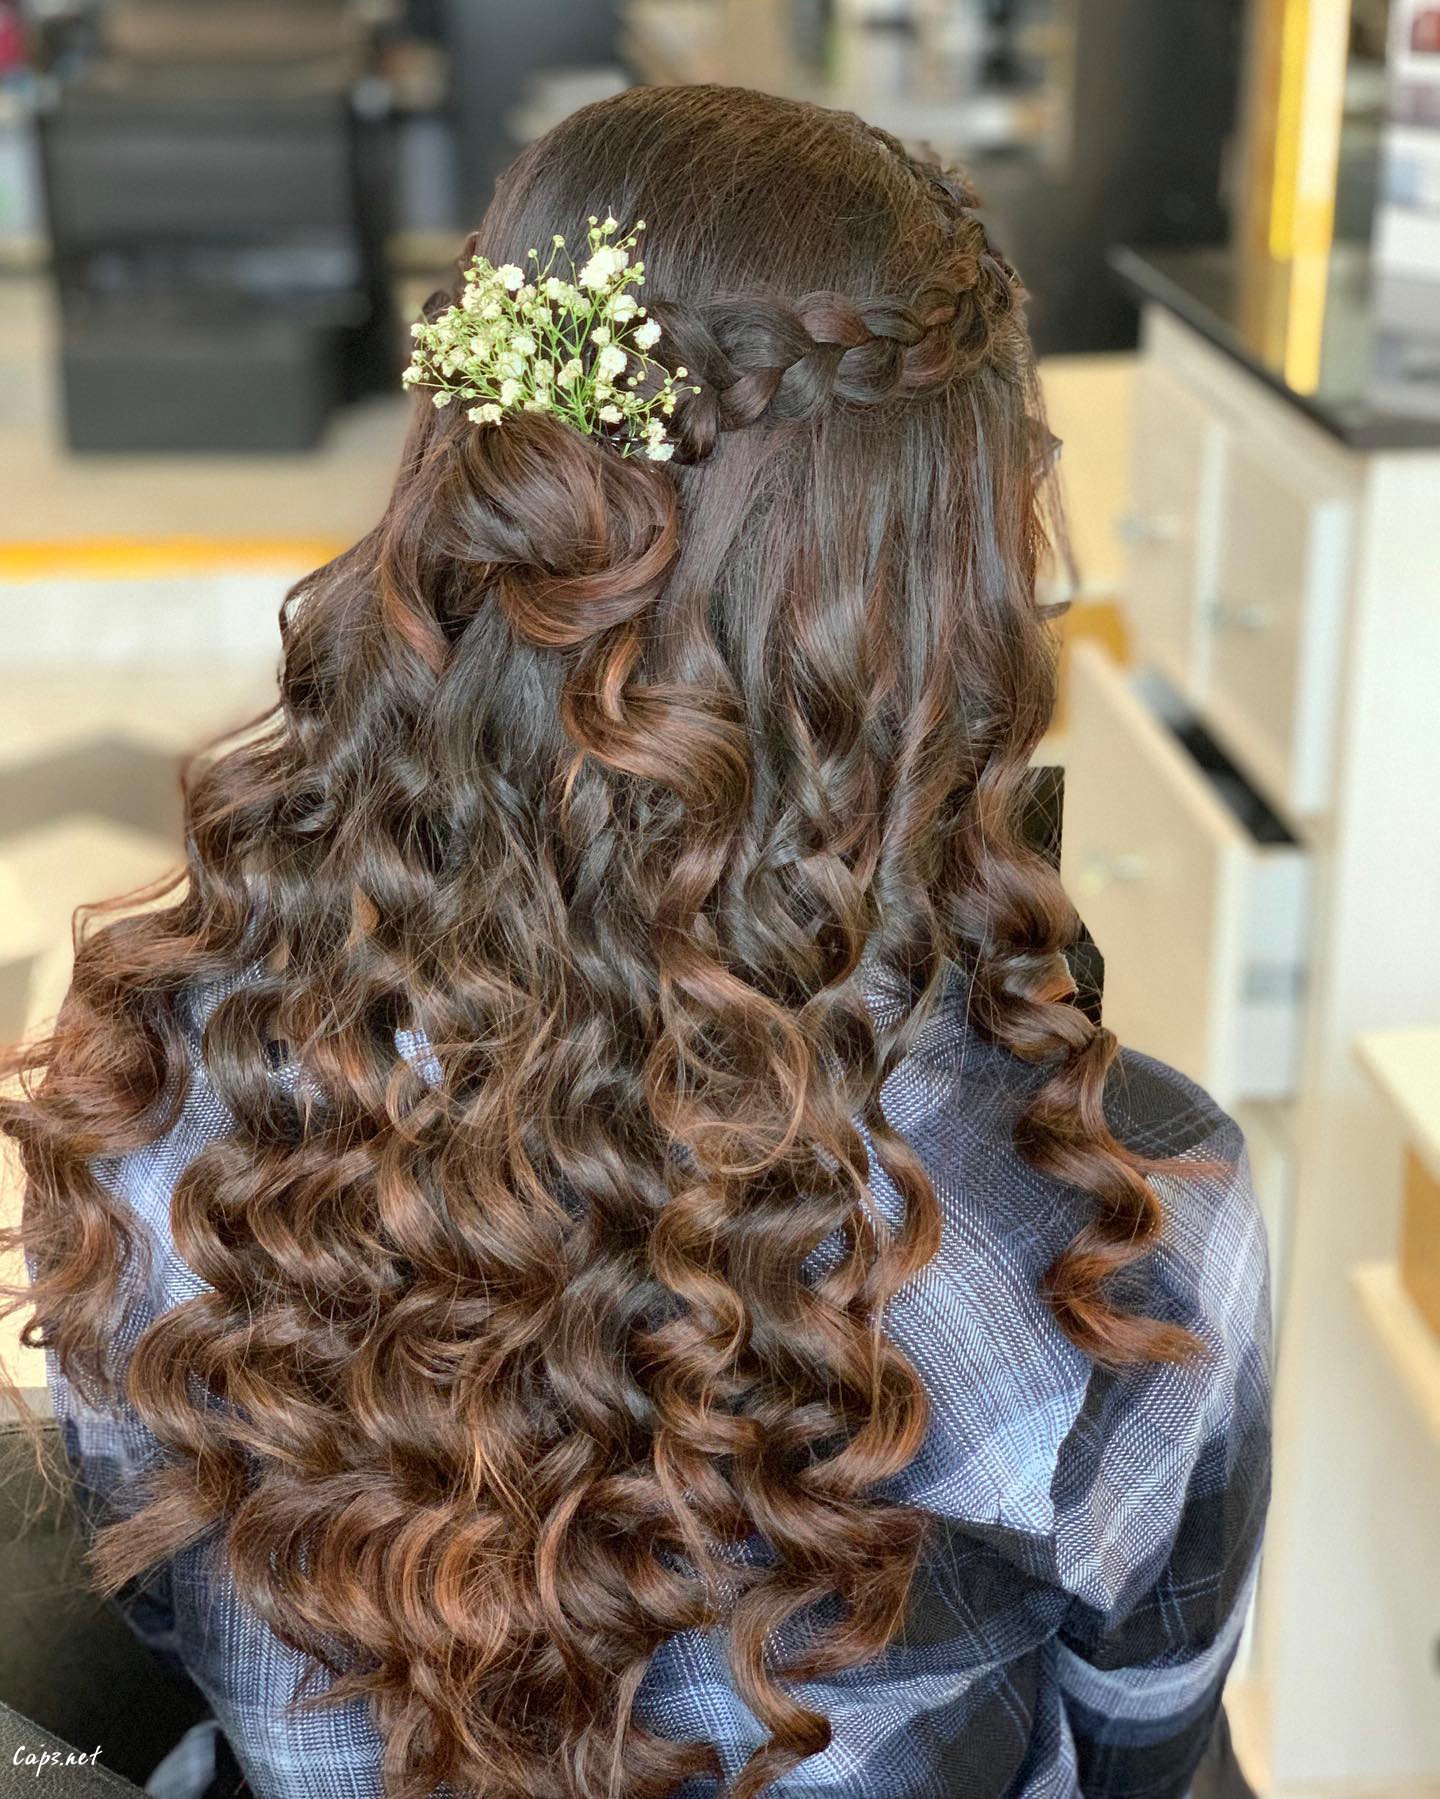 Wavy Hair With Flower 1